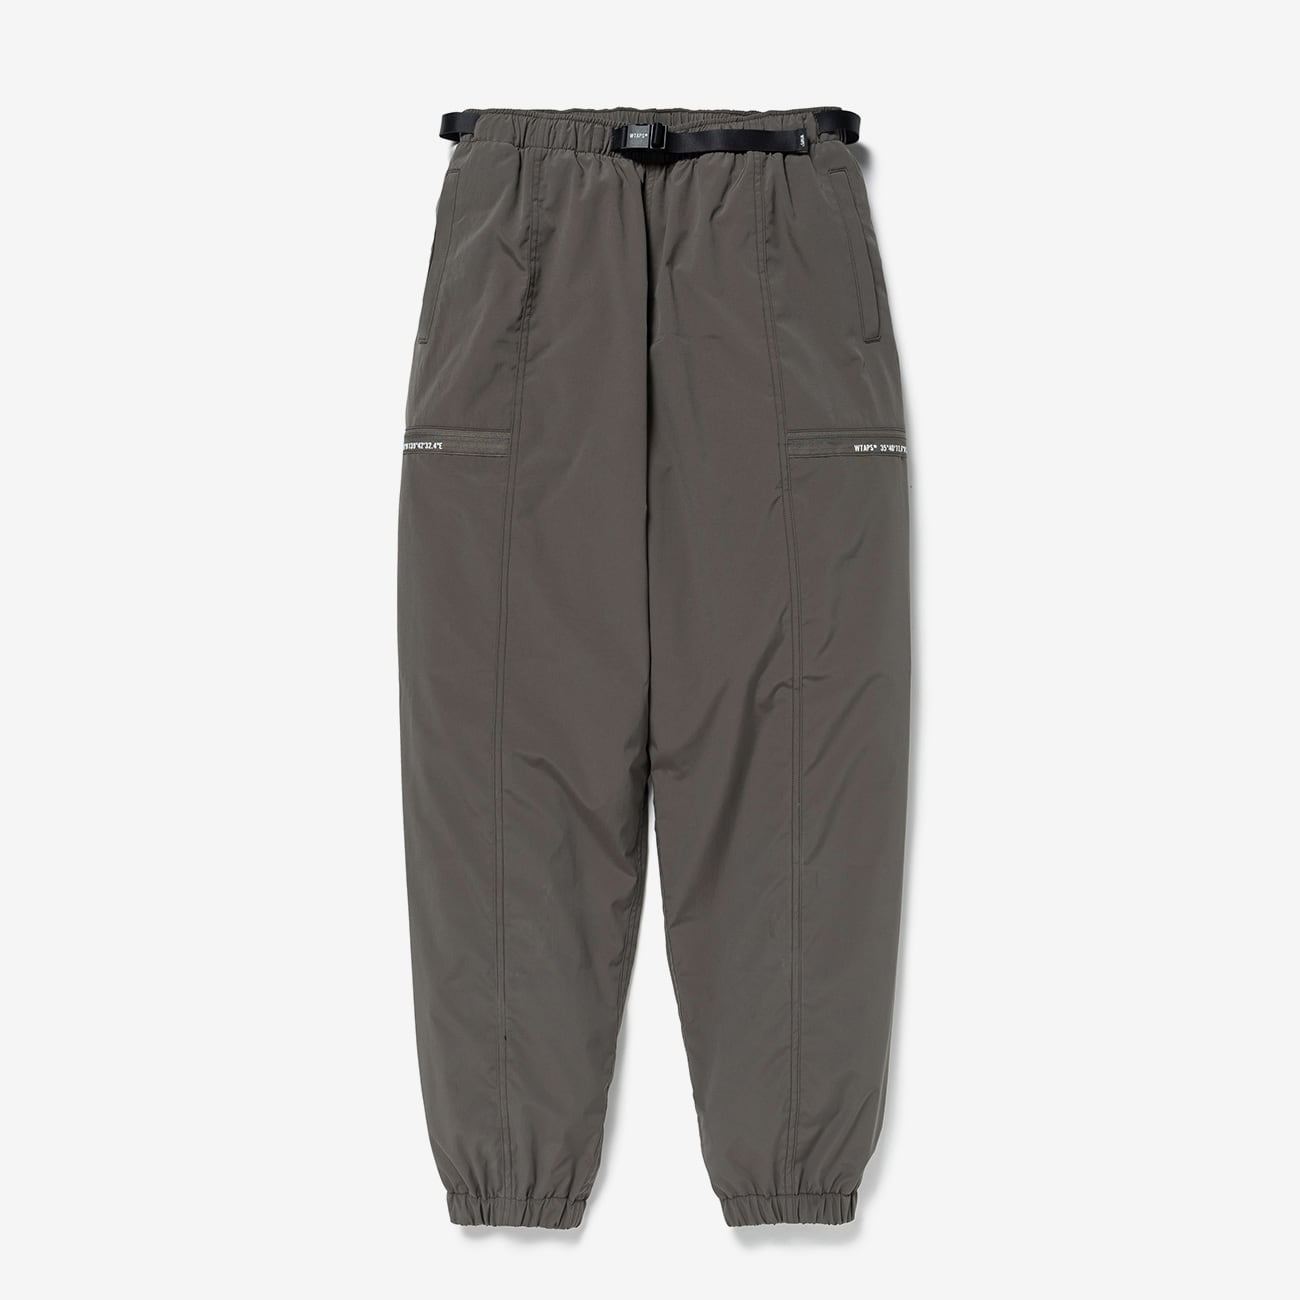 SPST2002 / TROUSERS / POLY. TUSSAH (GREIGE)公式通販 正規取扱店 